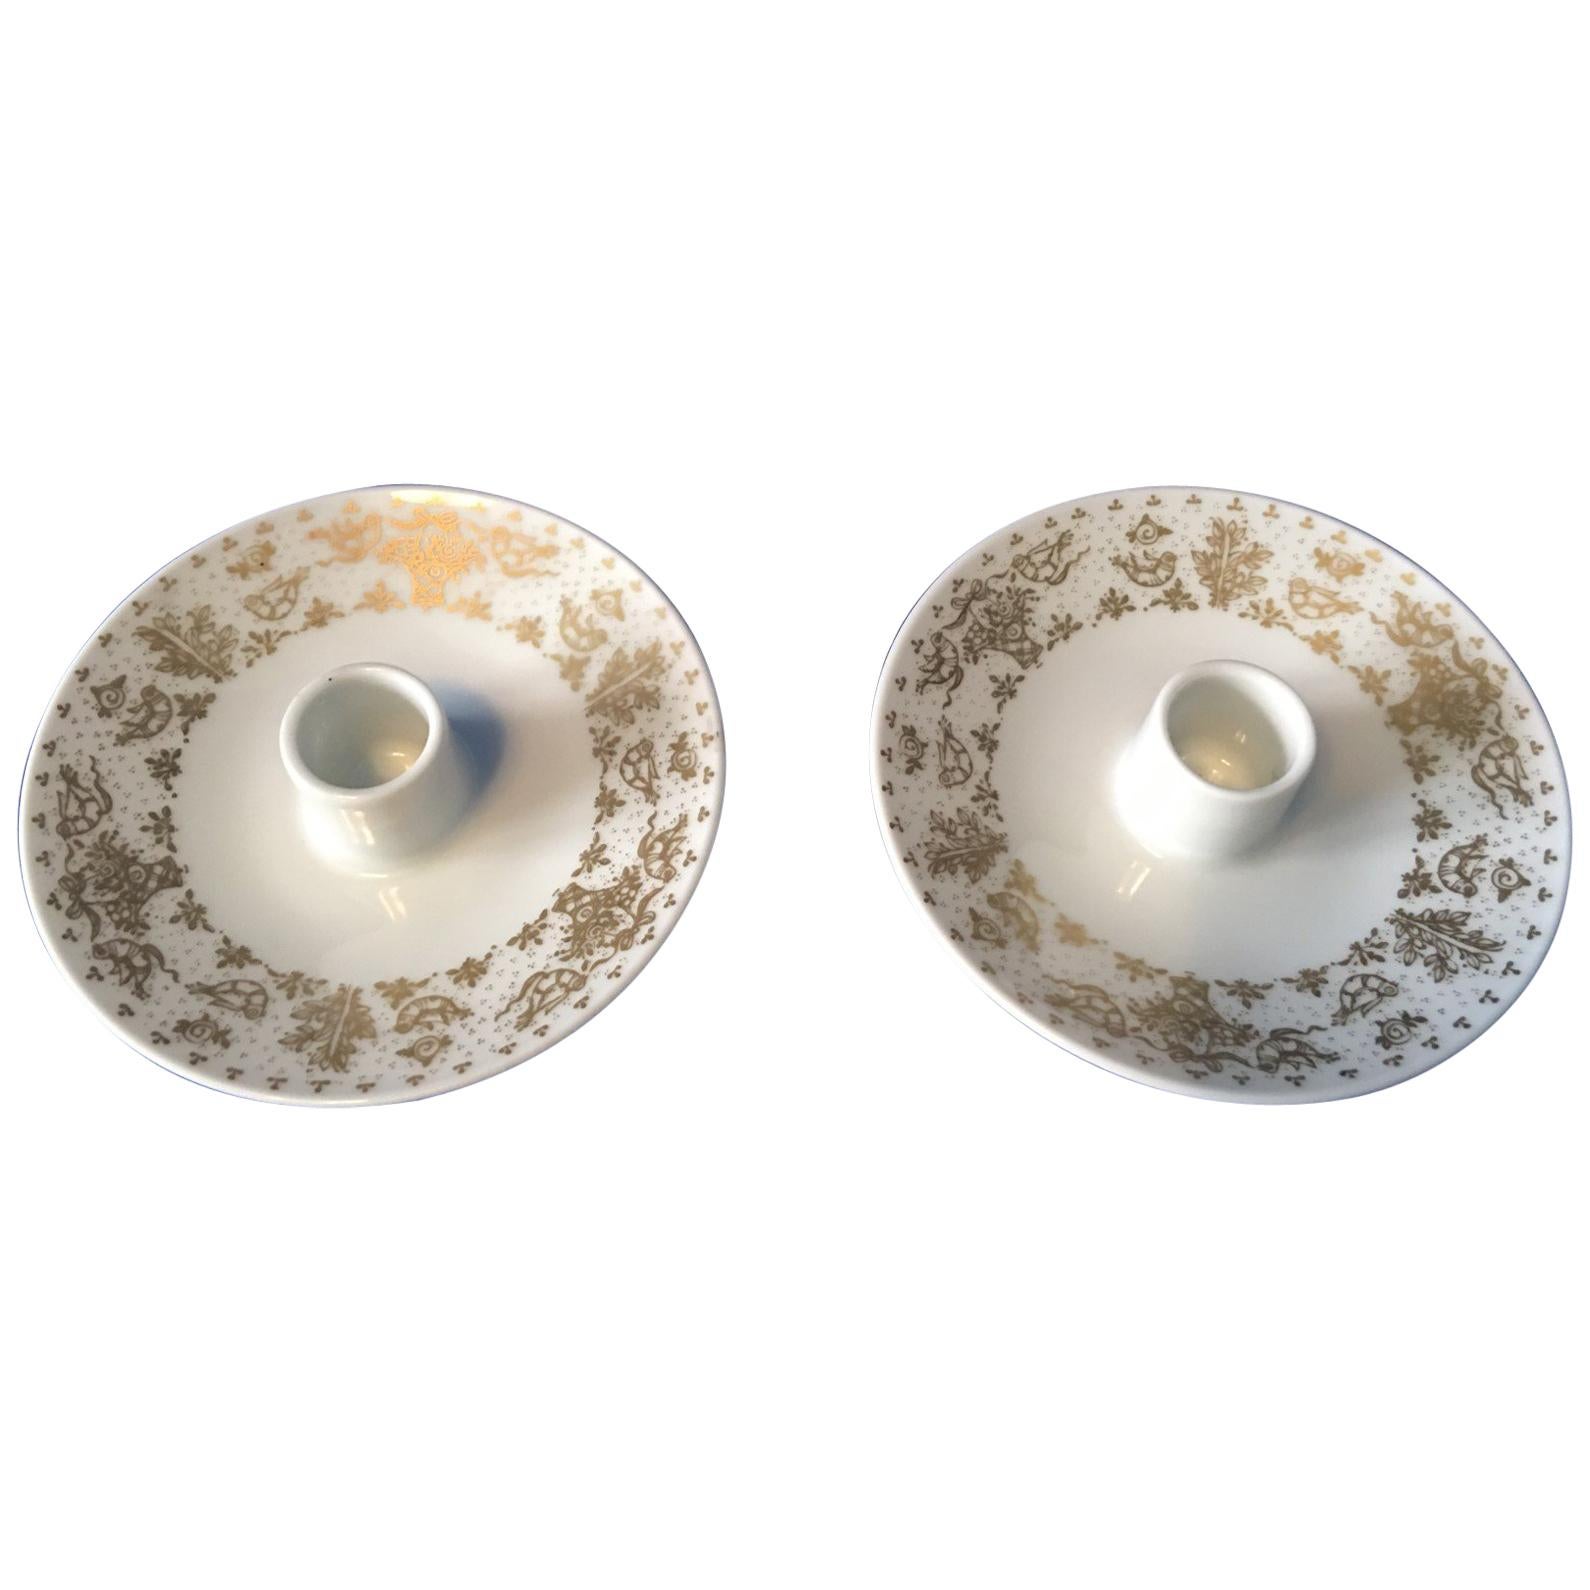 One Pair of Rosenthal Candleholders Designed by Raymond Loewy For Sale